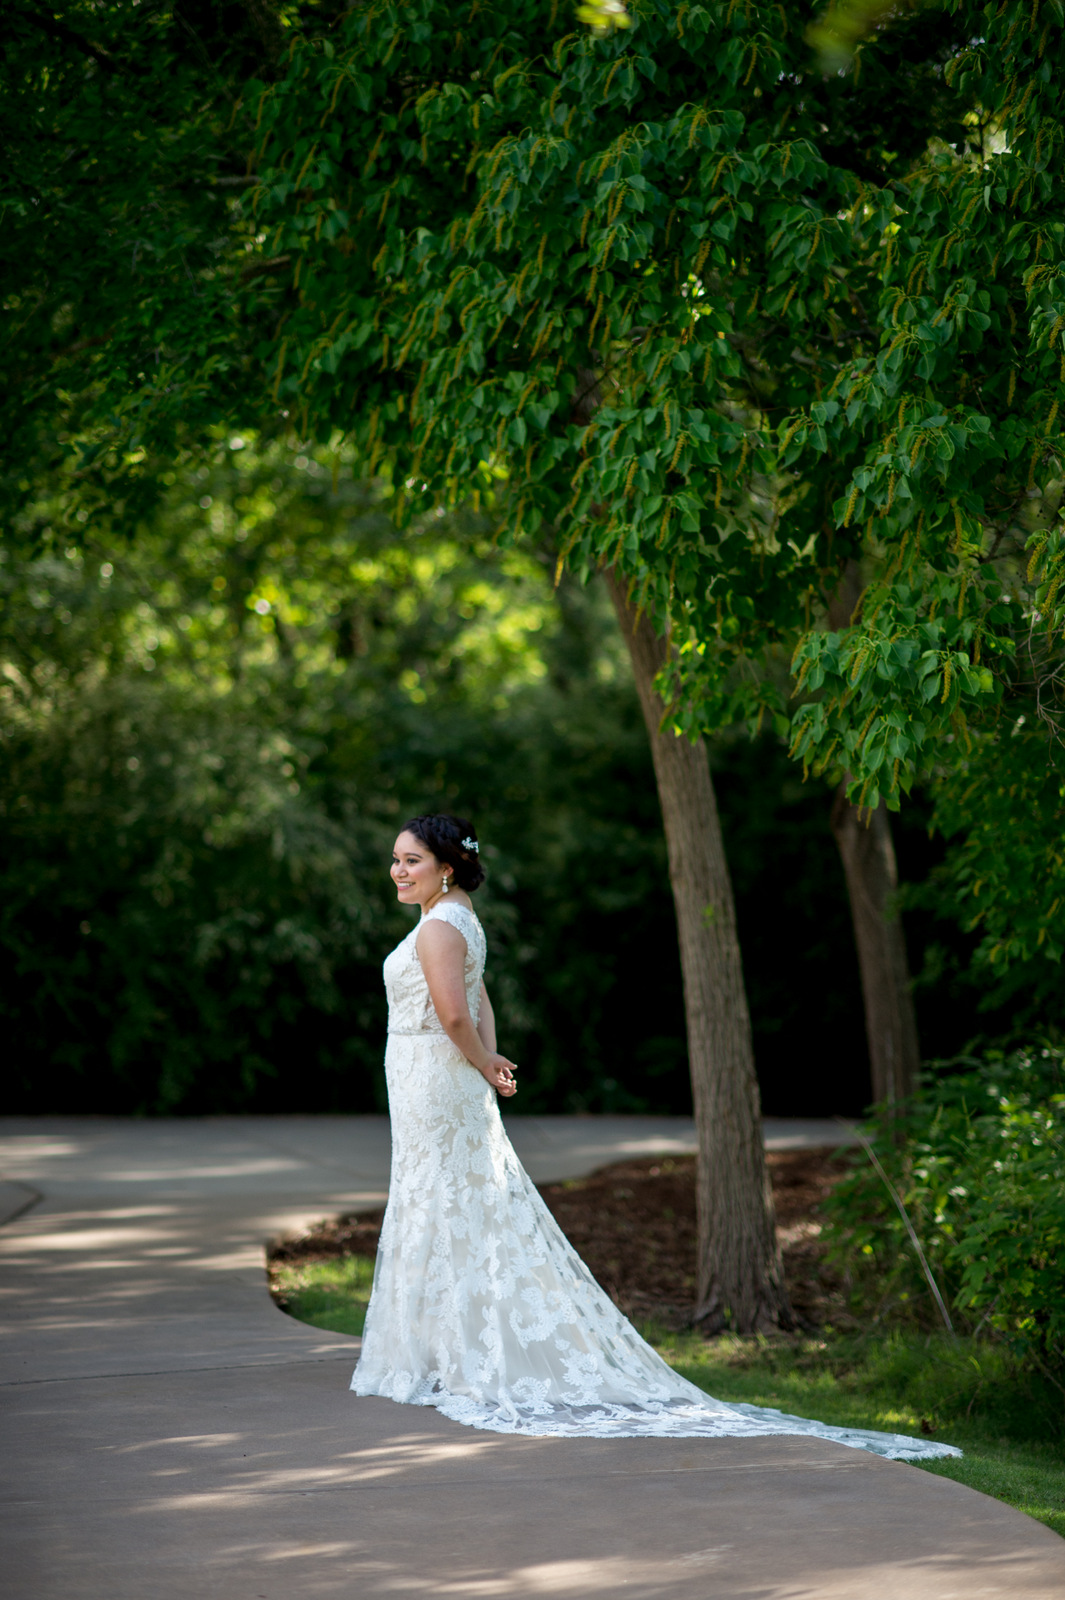 George H.W. Bush Presidential Library and Museum, College Station, TX bridal portrait photographer